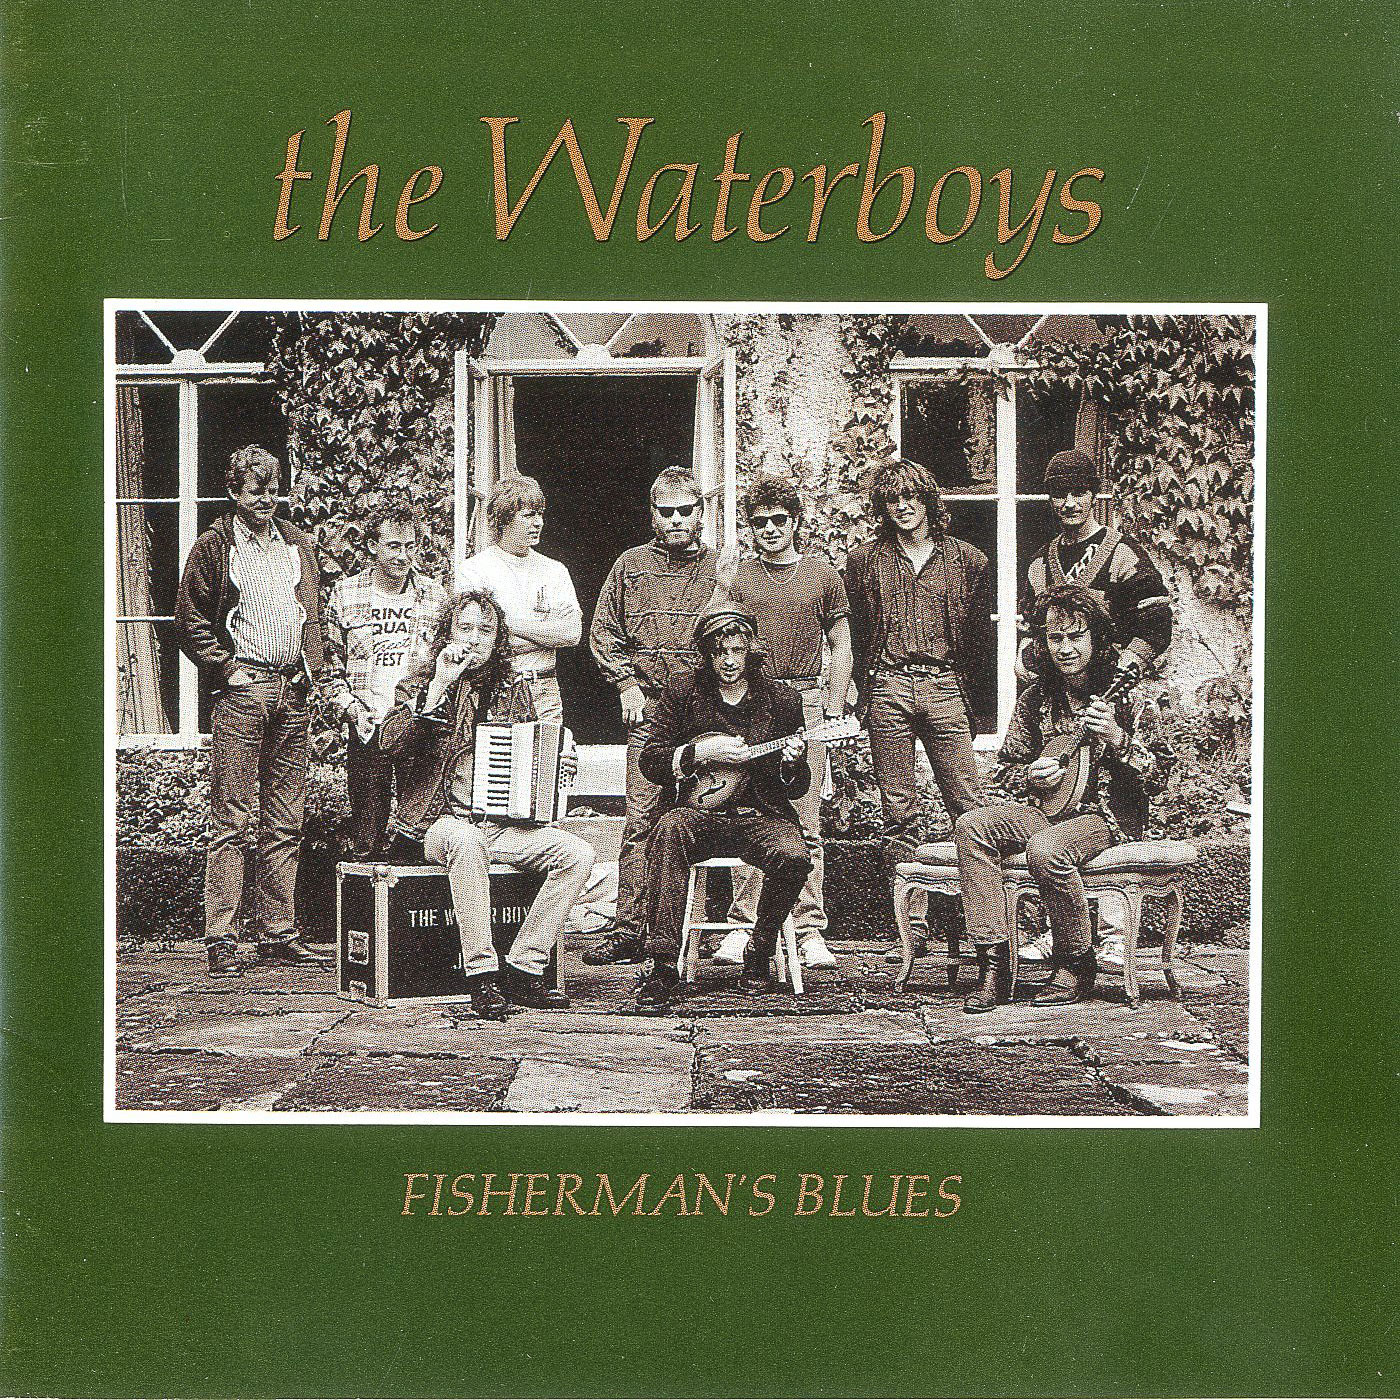 613 The Waterboys – Fisherman’s Blues